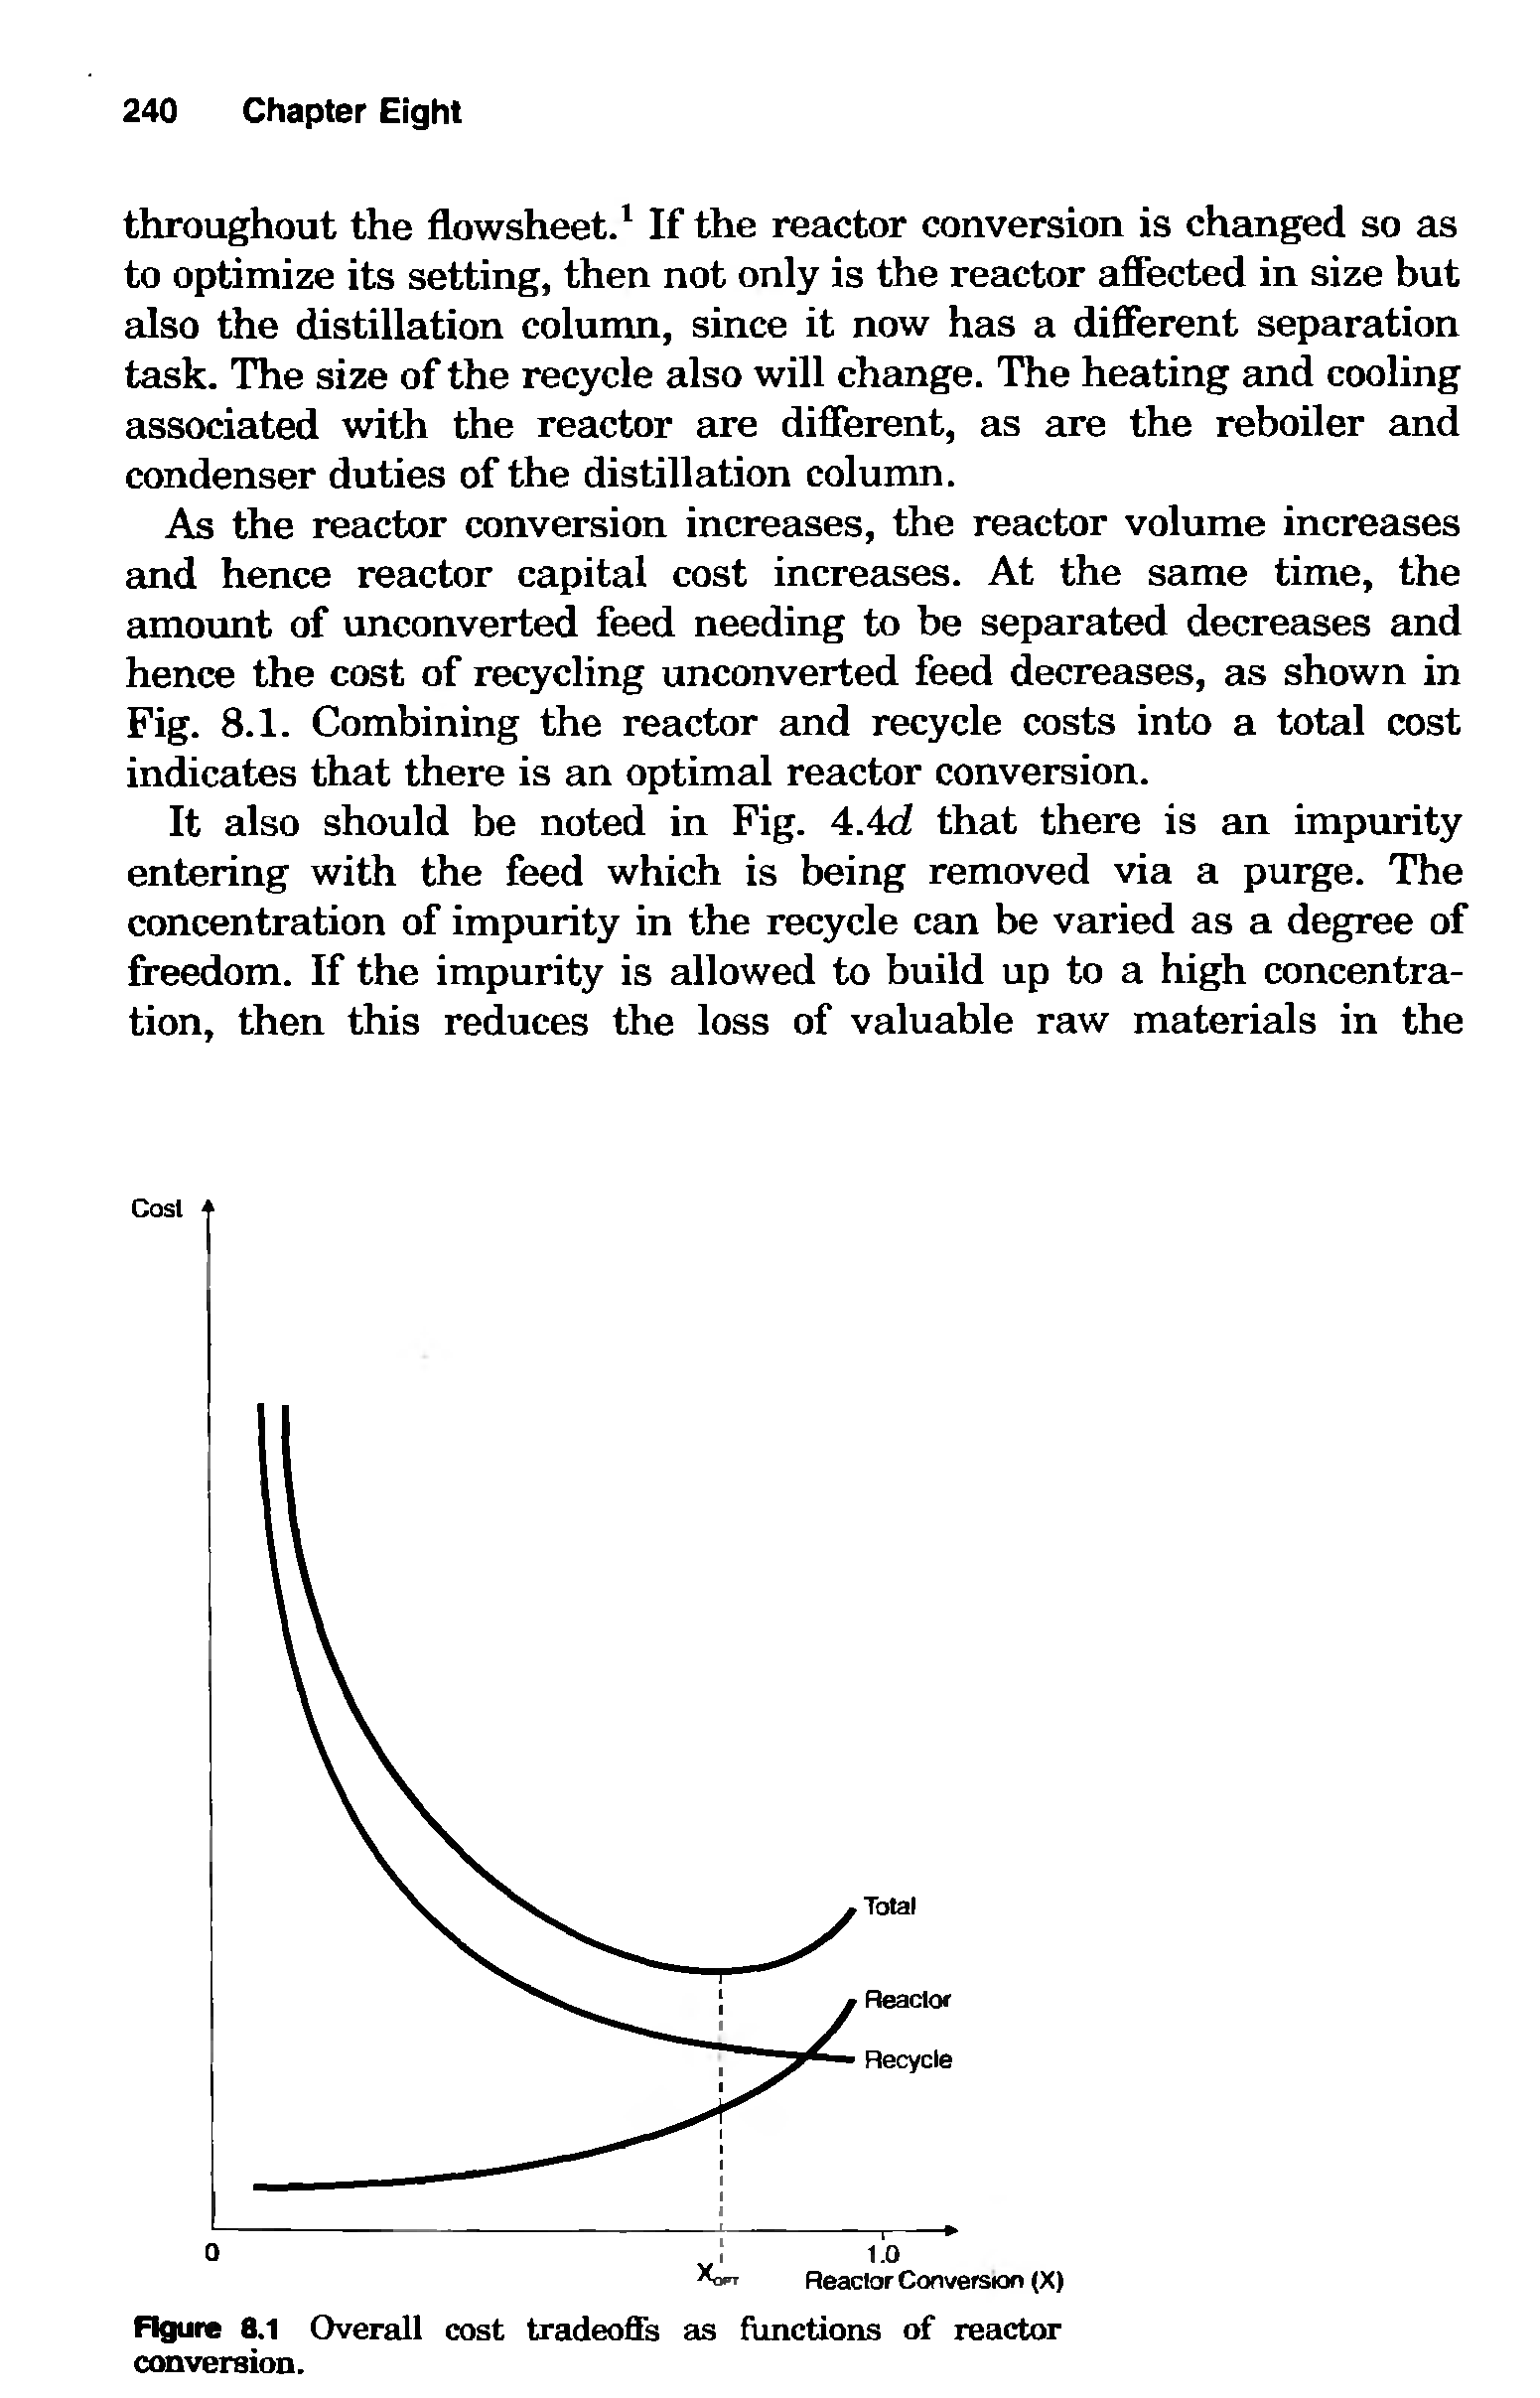 Figure 8.1 Overall cost tradeoffs as functions of reactor conversion.